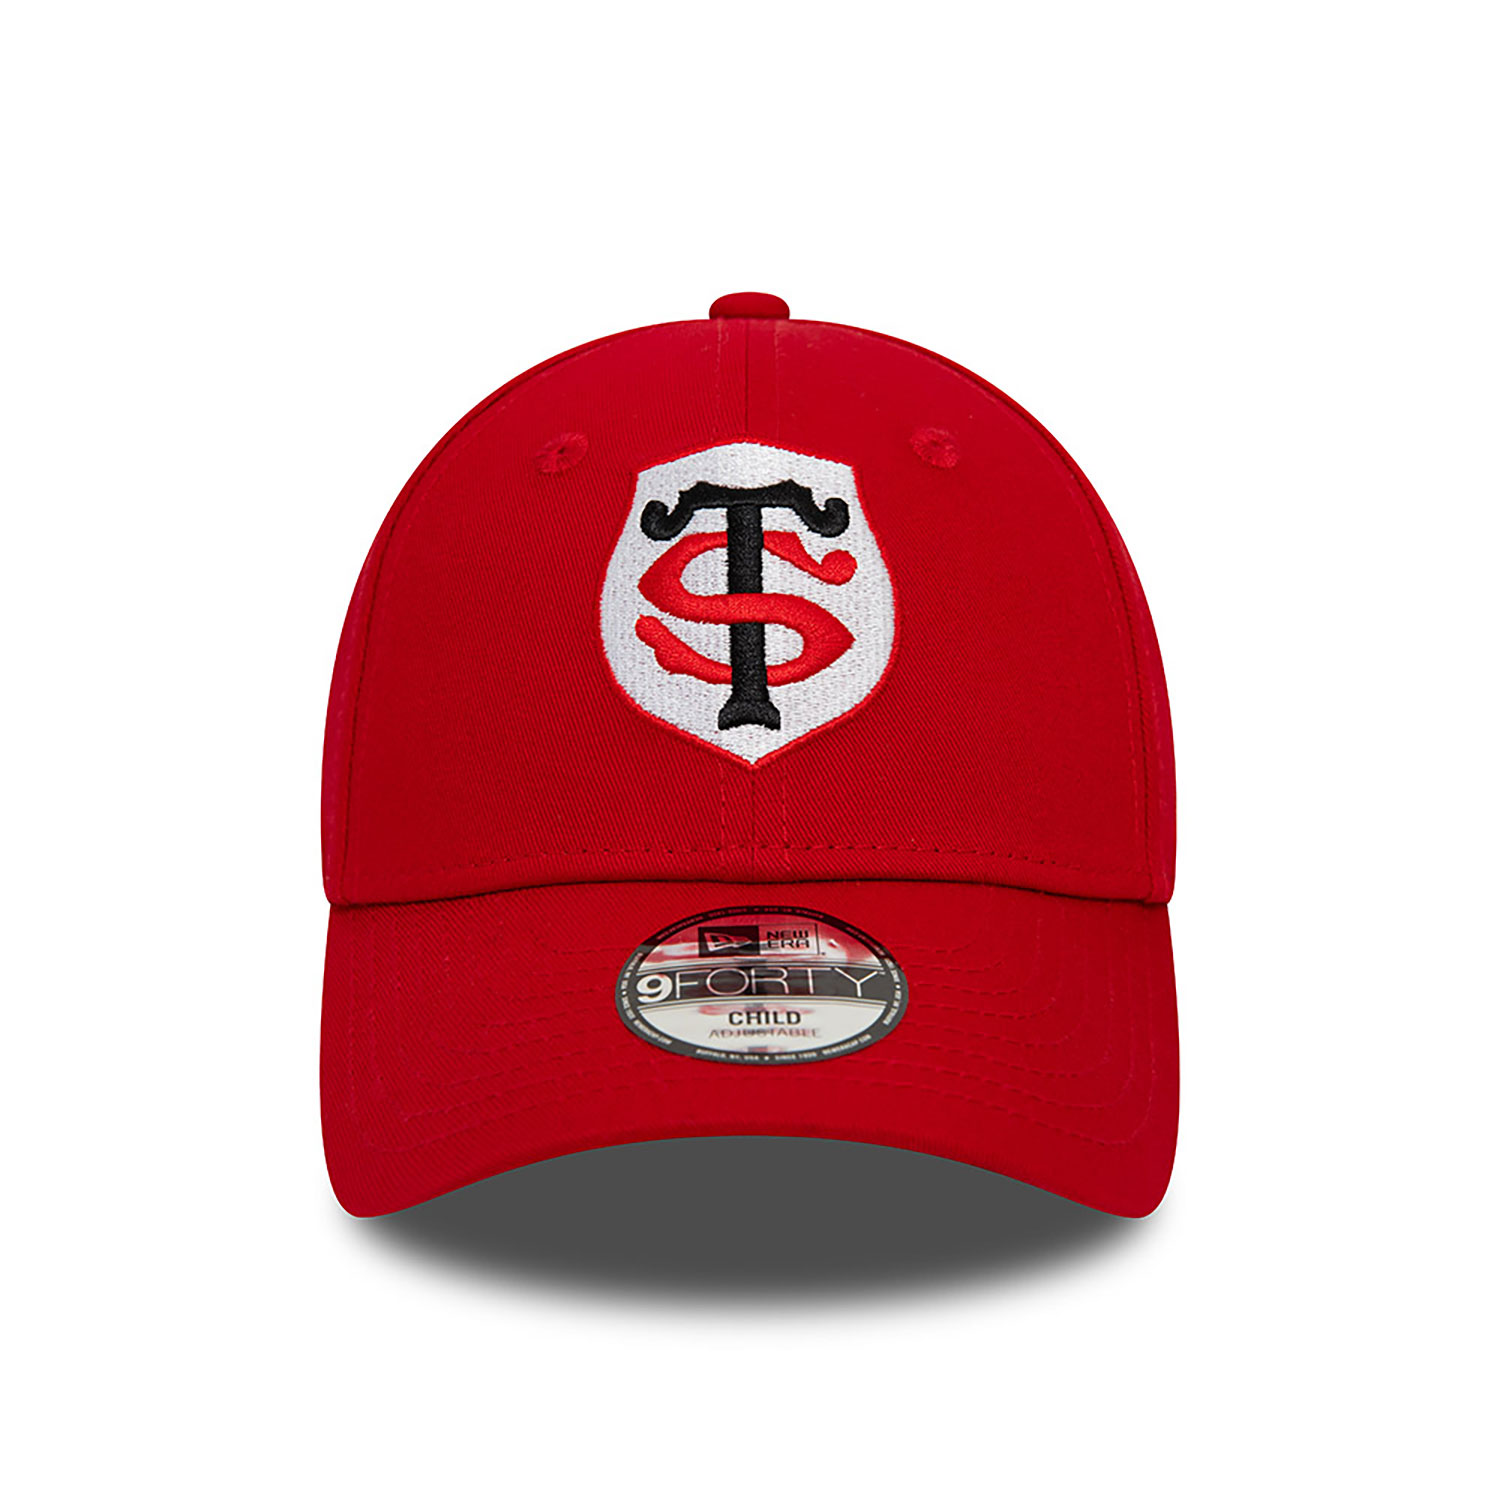 Stade Toulousain Child Team Logo Red 9FORTY Adjustable Cap